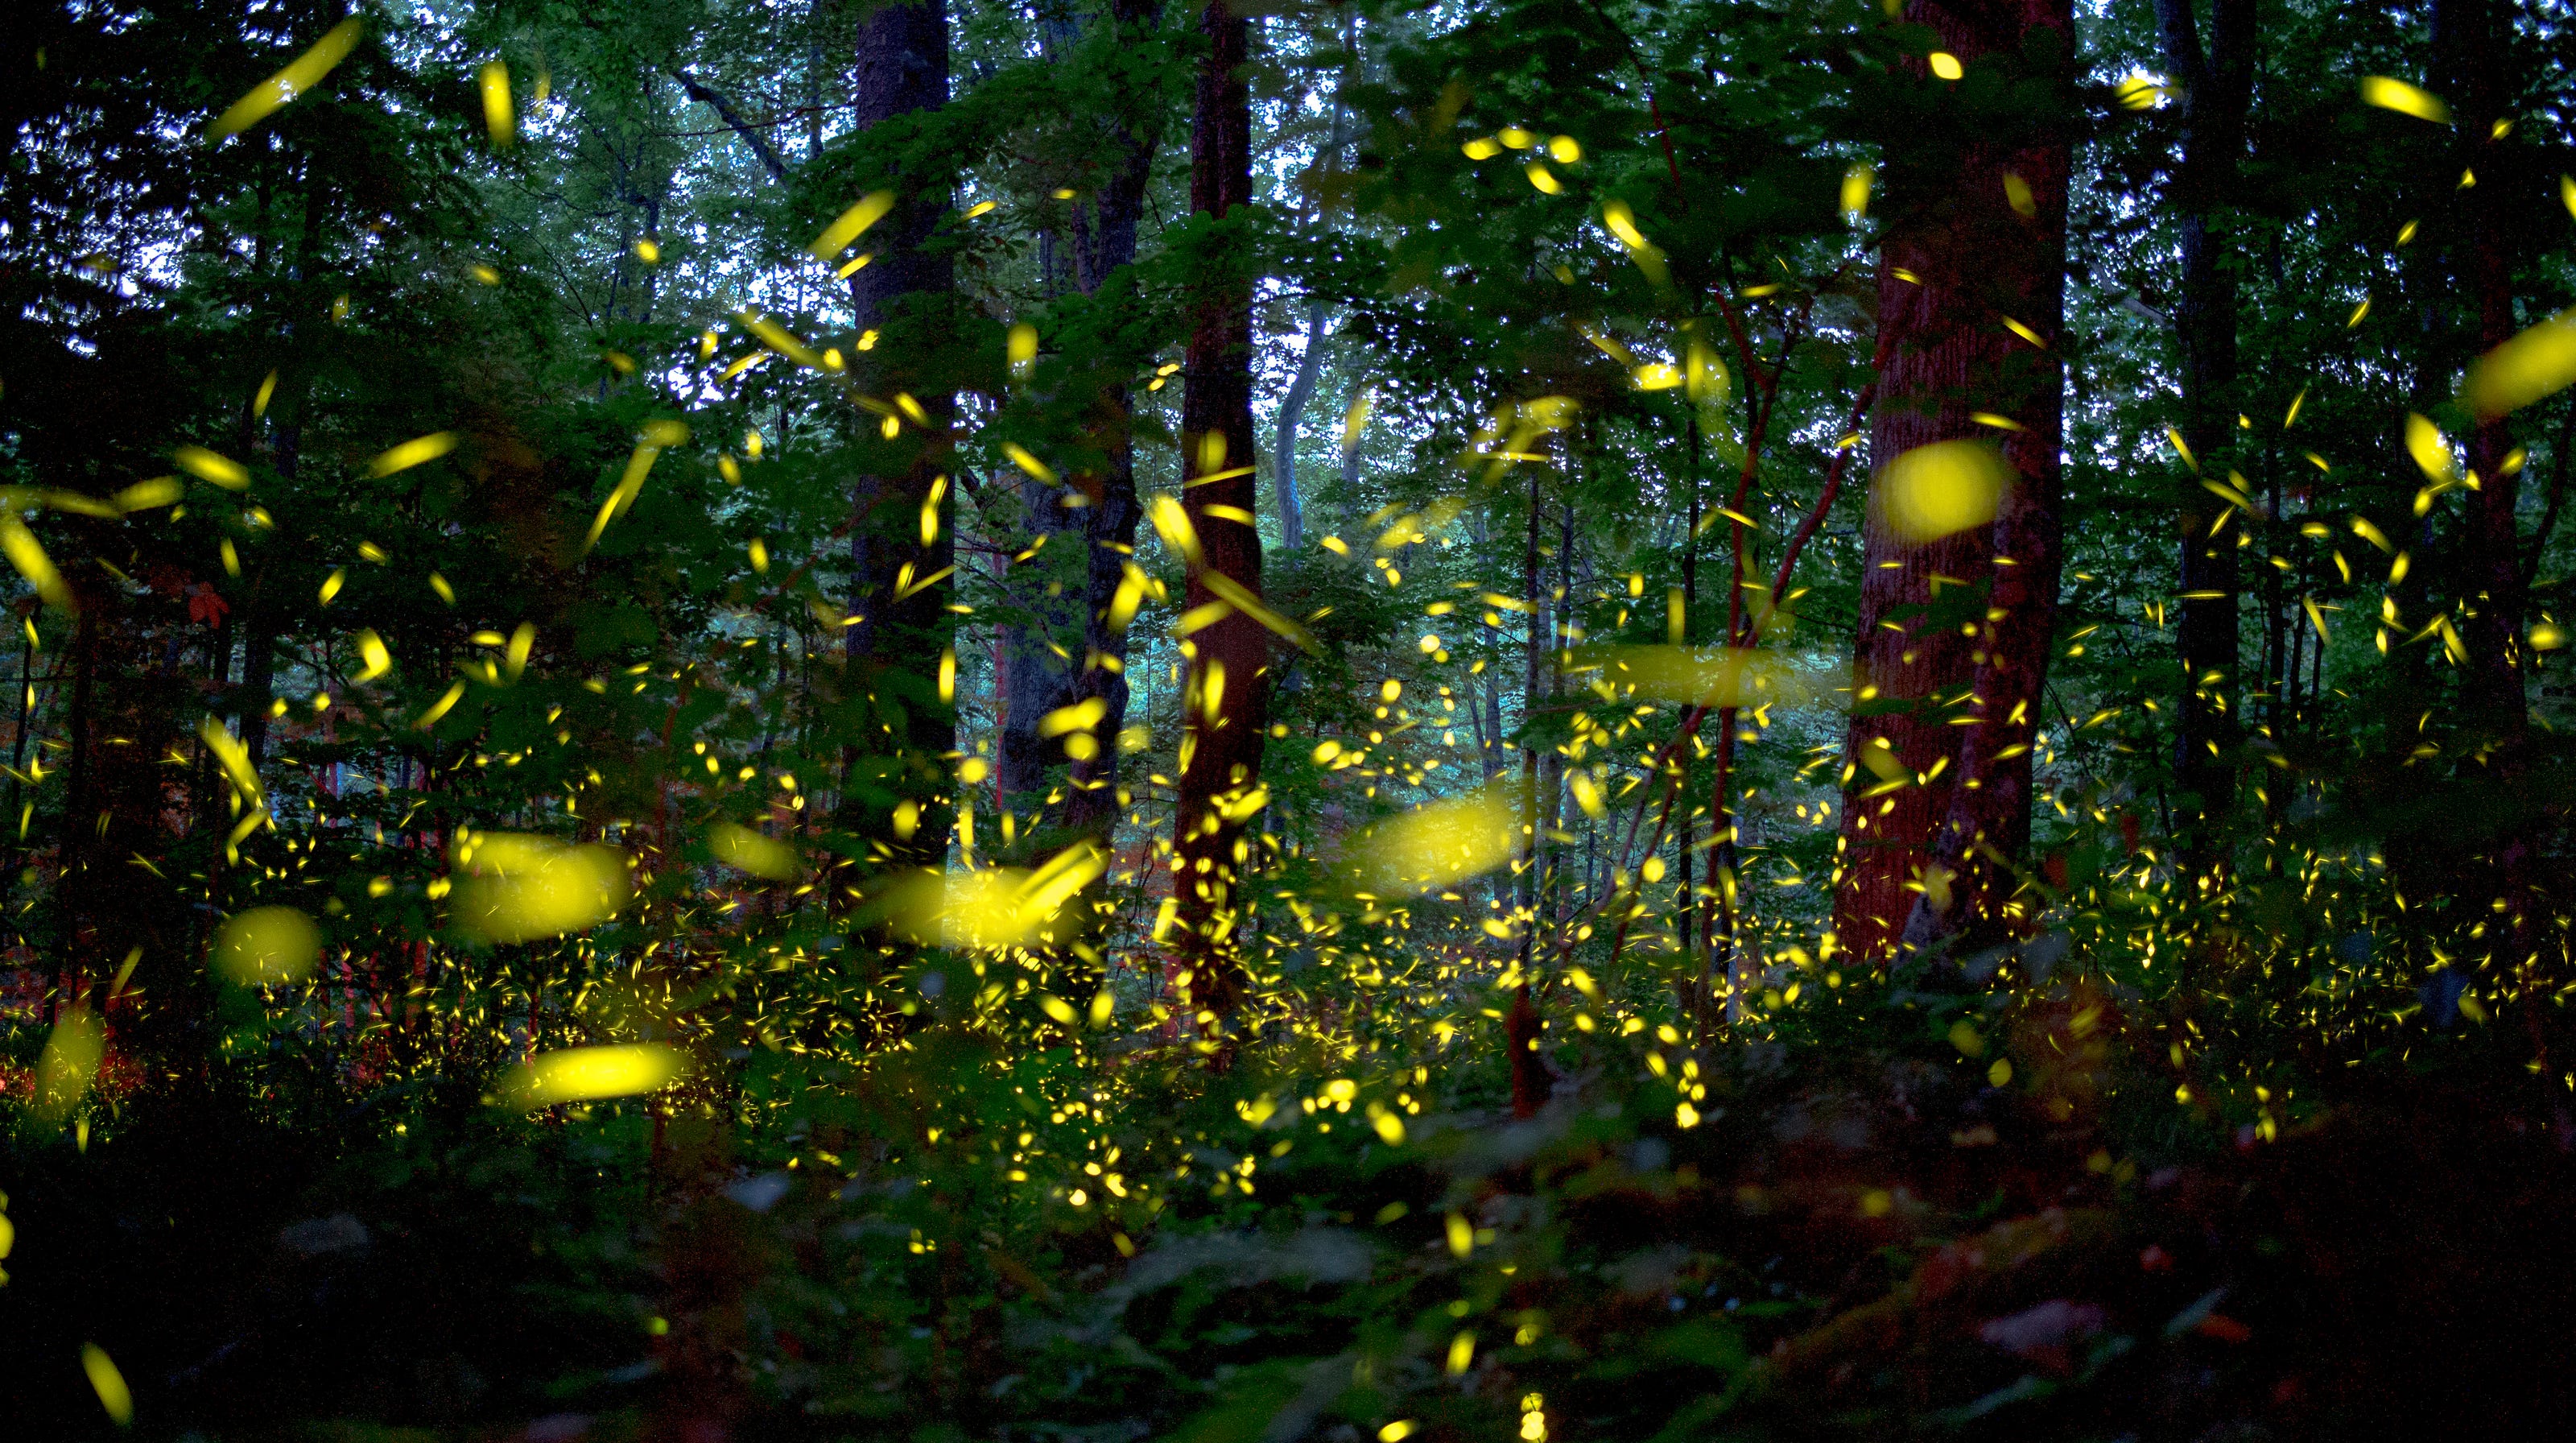 Great Smoky Mountains spectacle Synchronous fireflies left us speechless